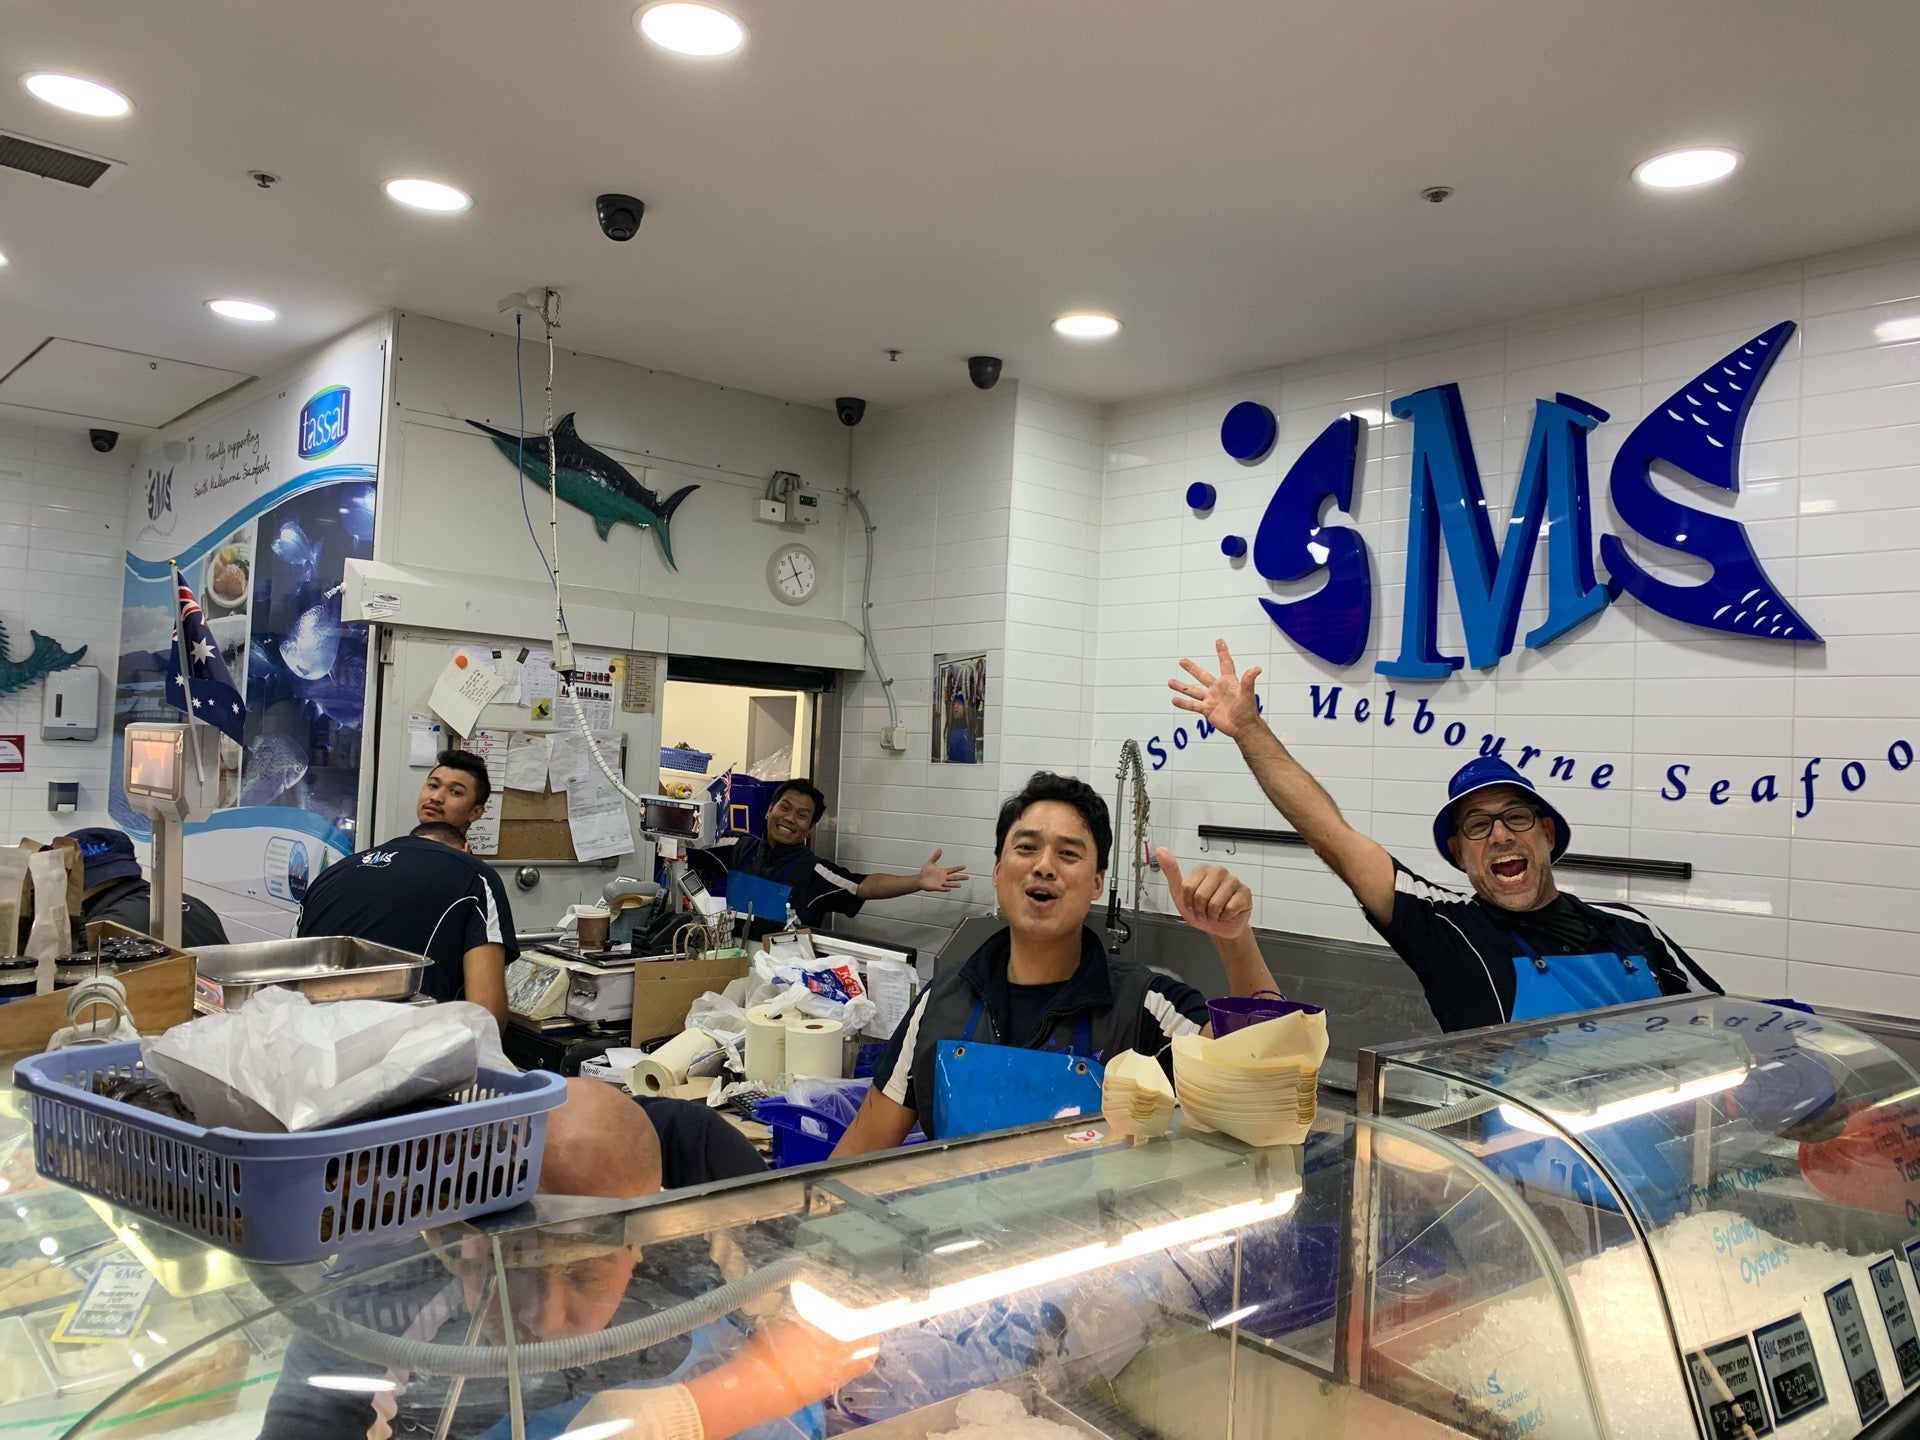 South Melbourne Seafoods